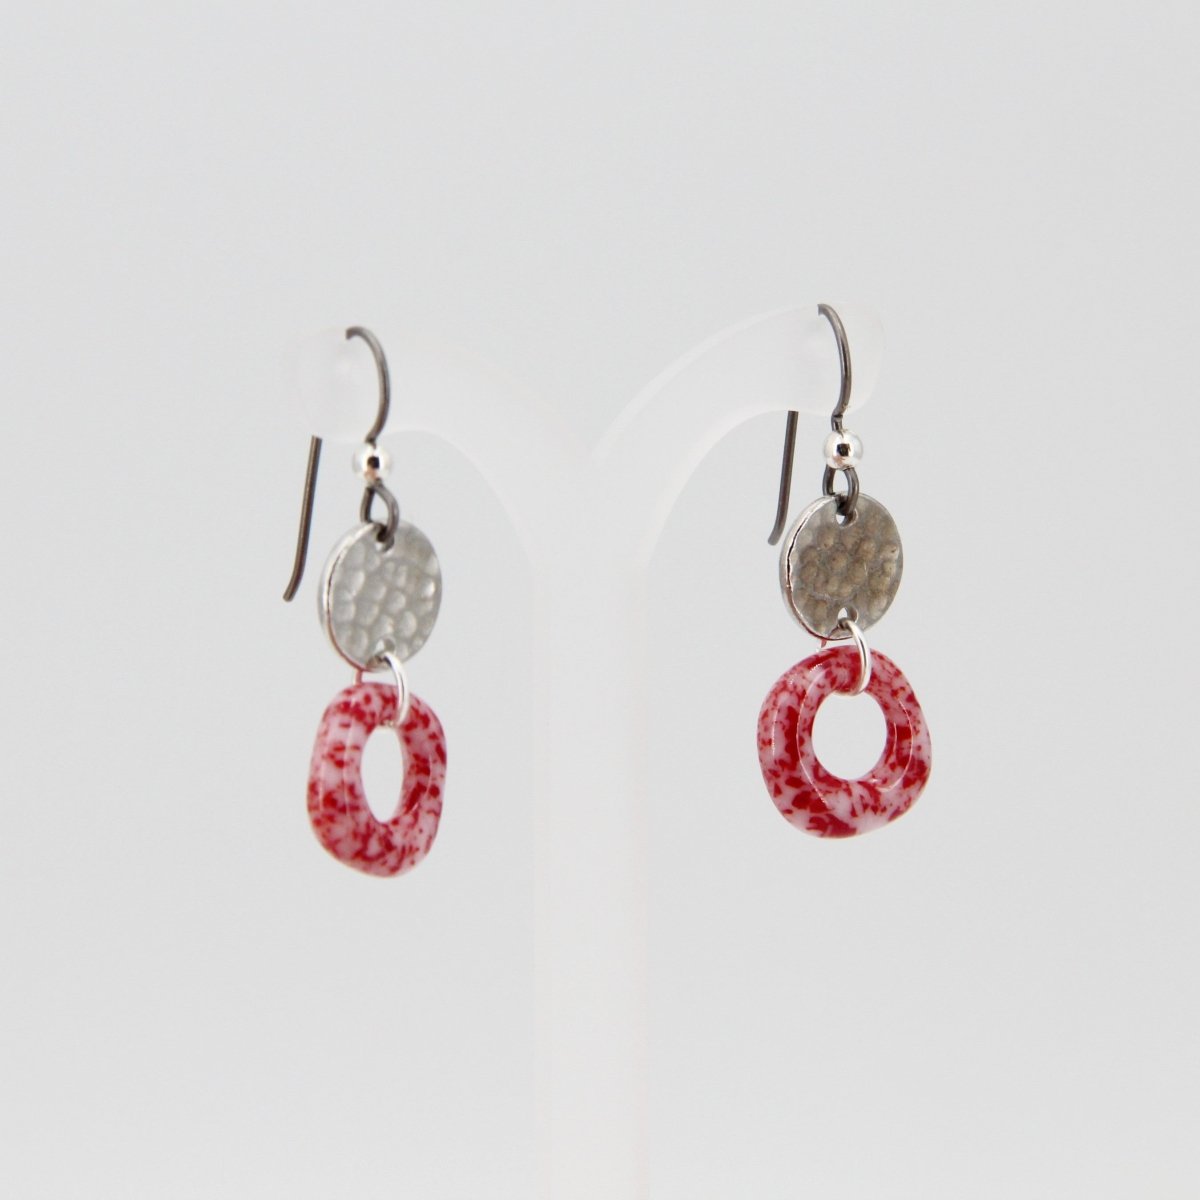 Red and White Glass Earrings with Circle Charms